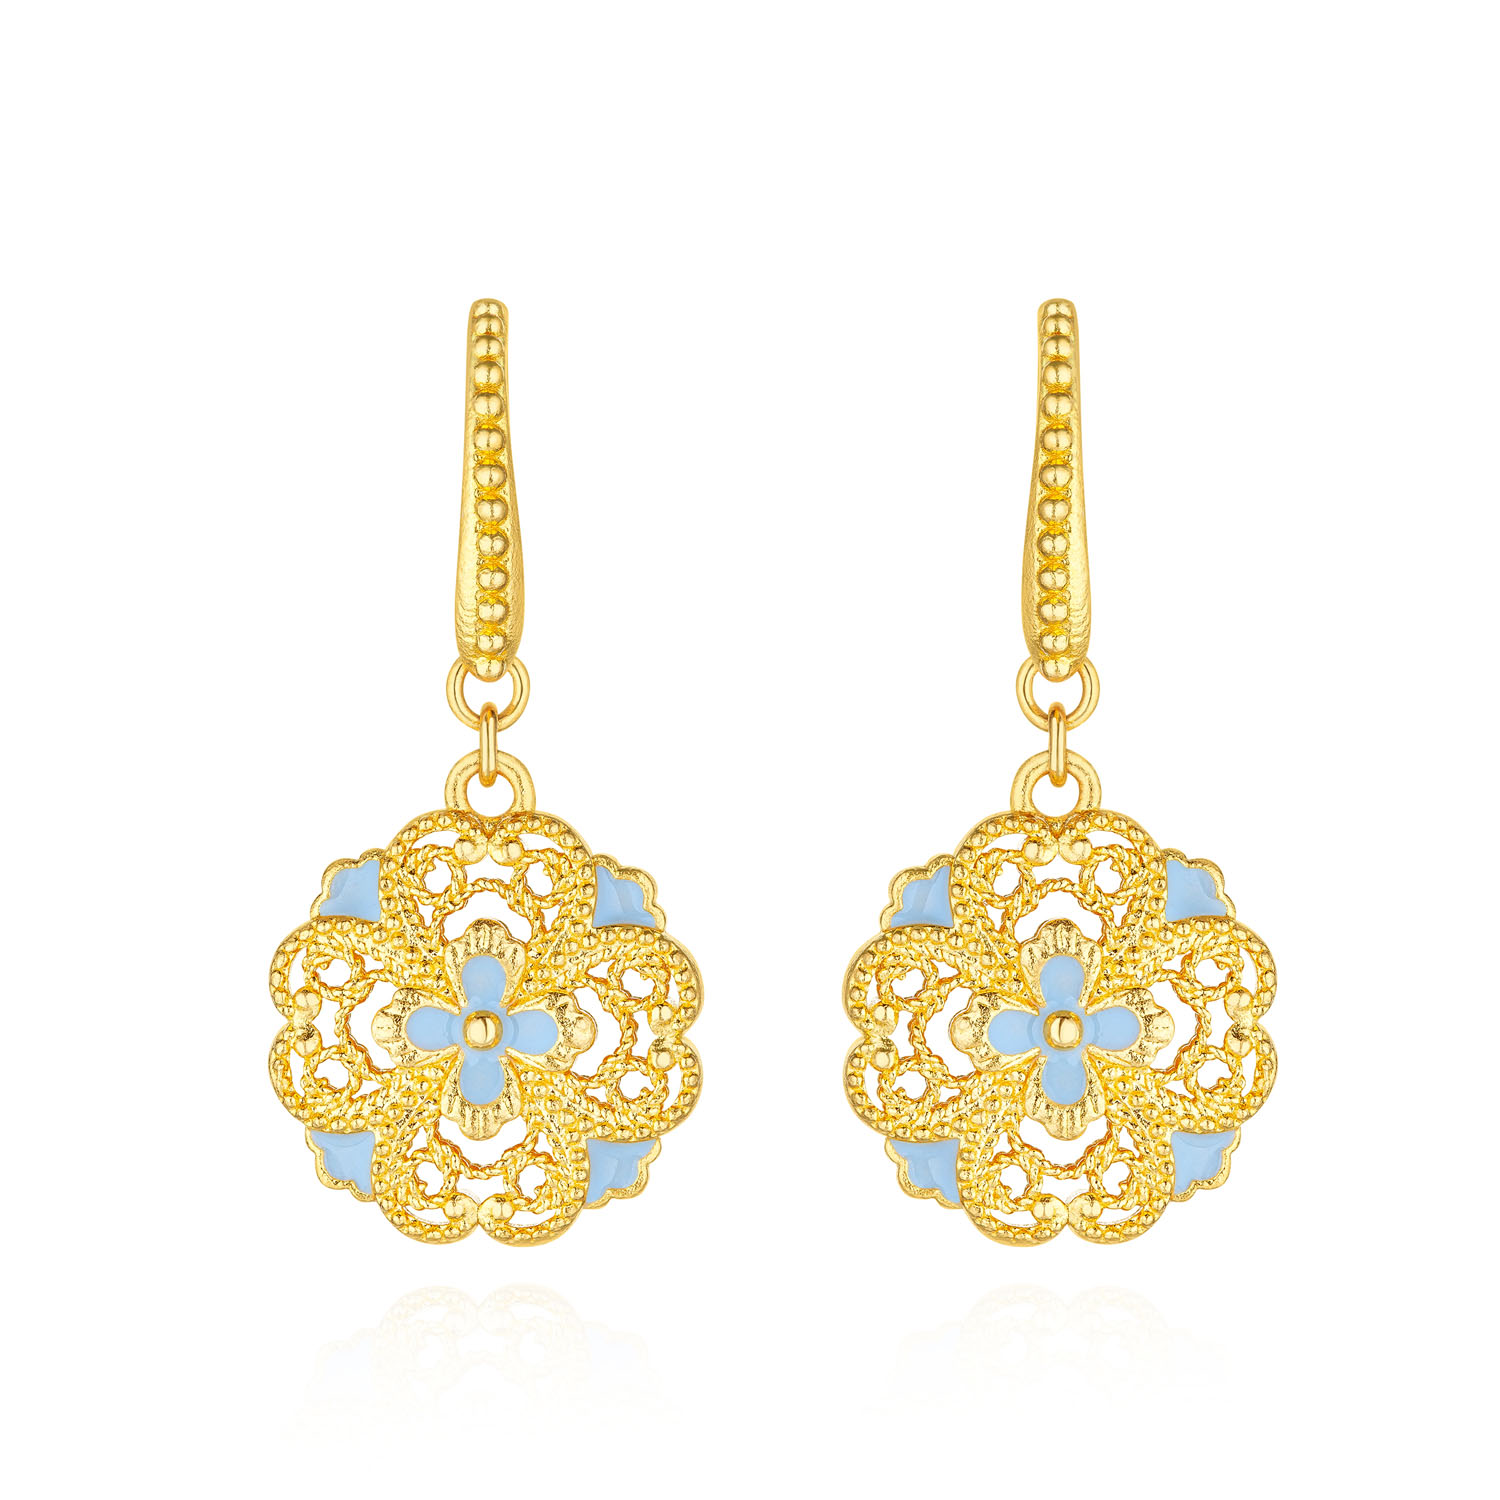 Heirloom Fortune - Charm of Song Dynasty Collection "Blue Floral Rhythm" Gold Earrings